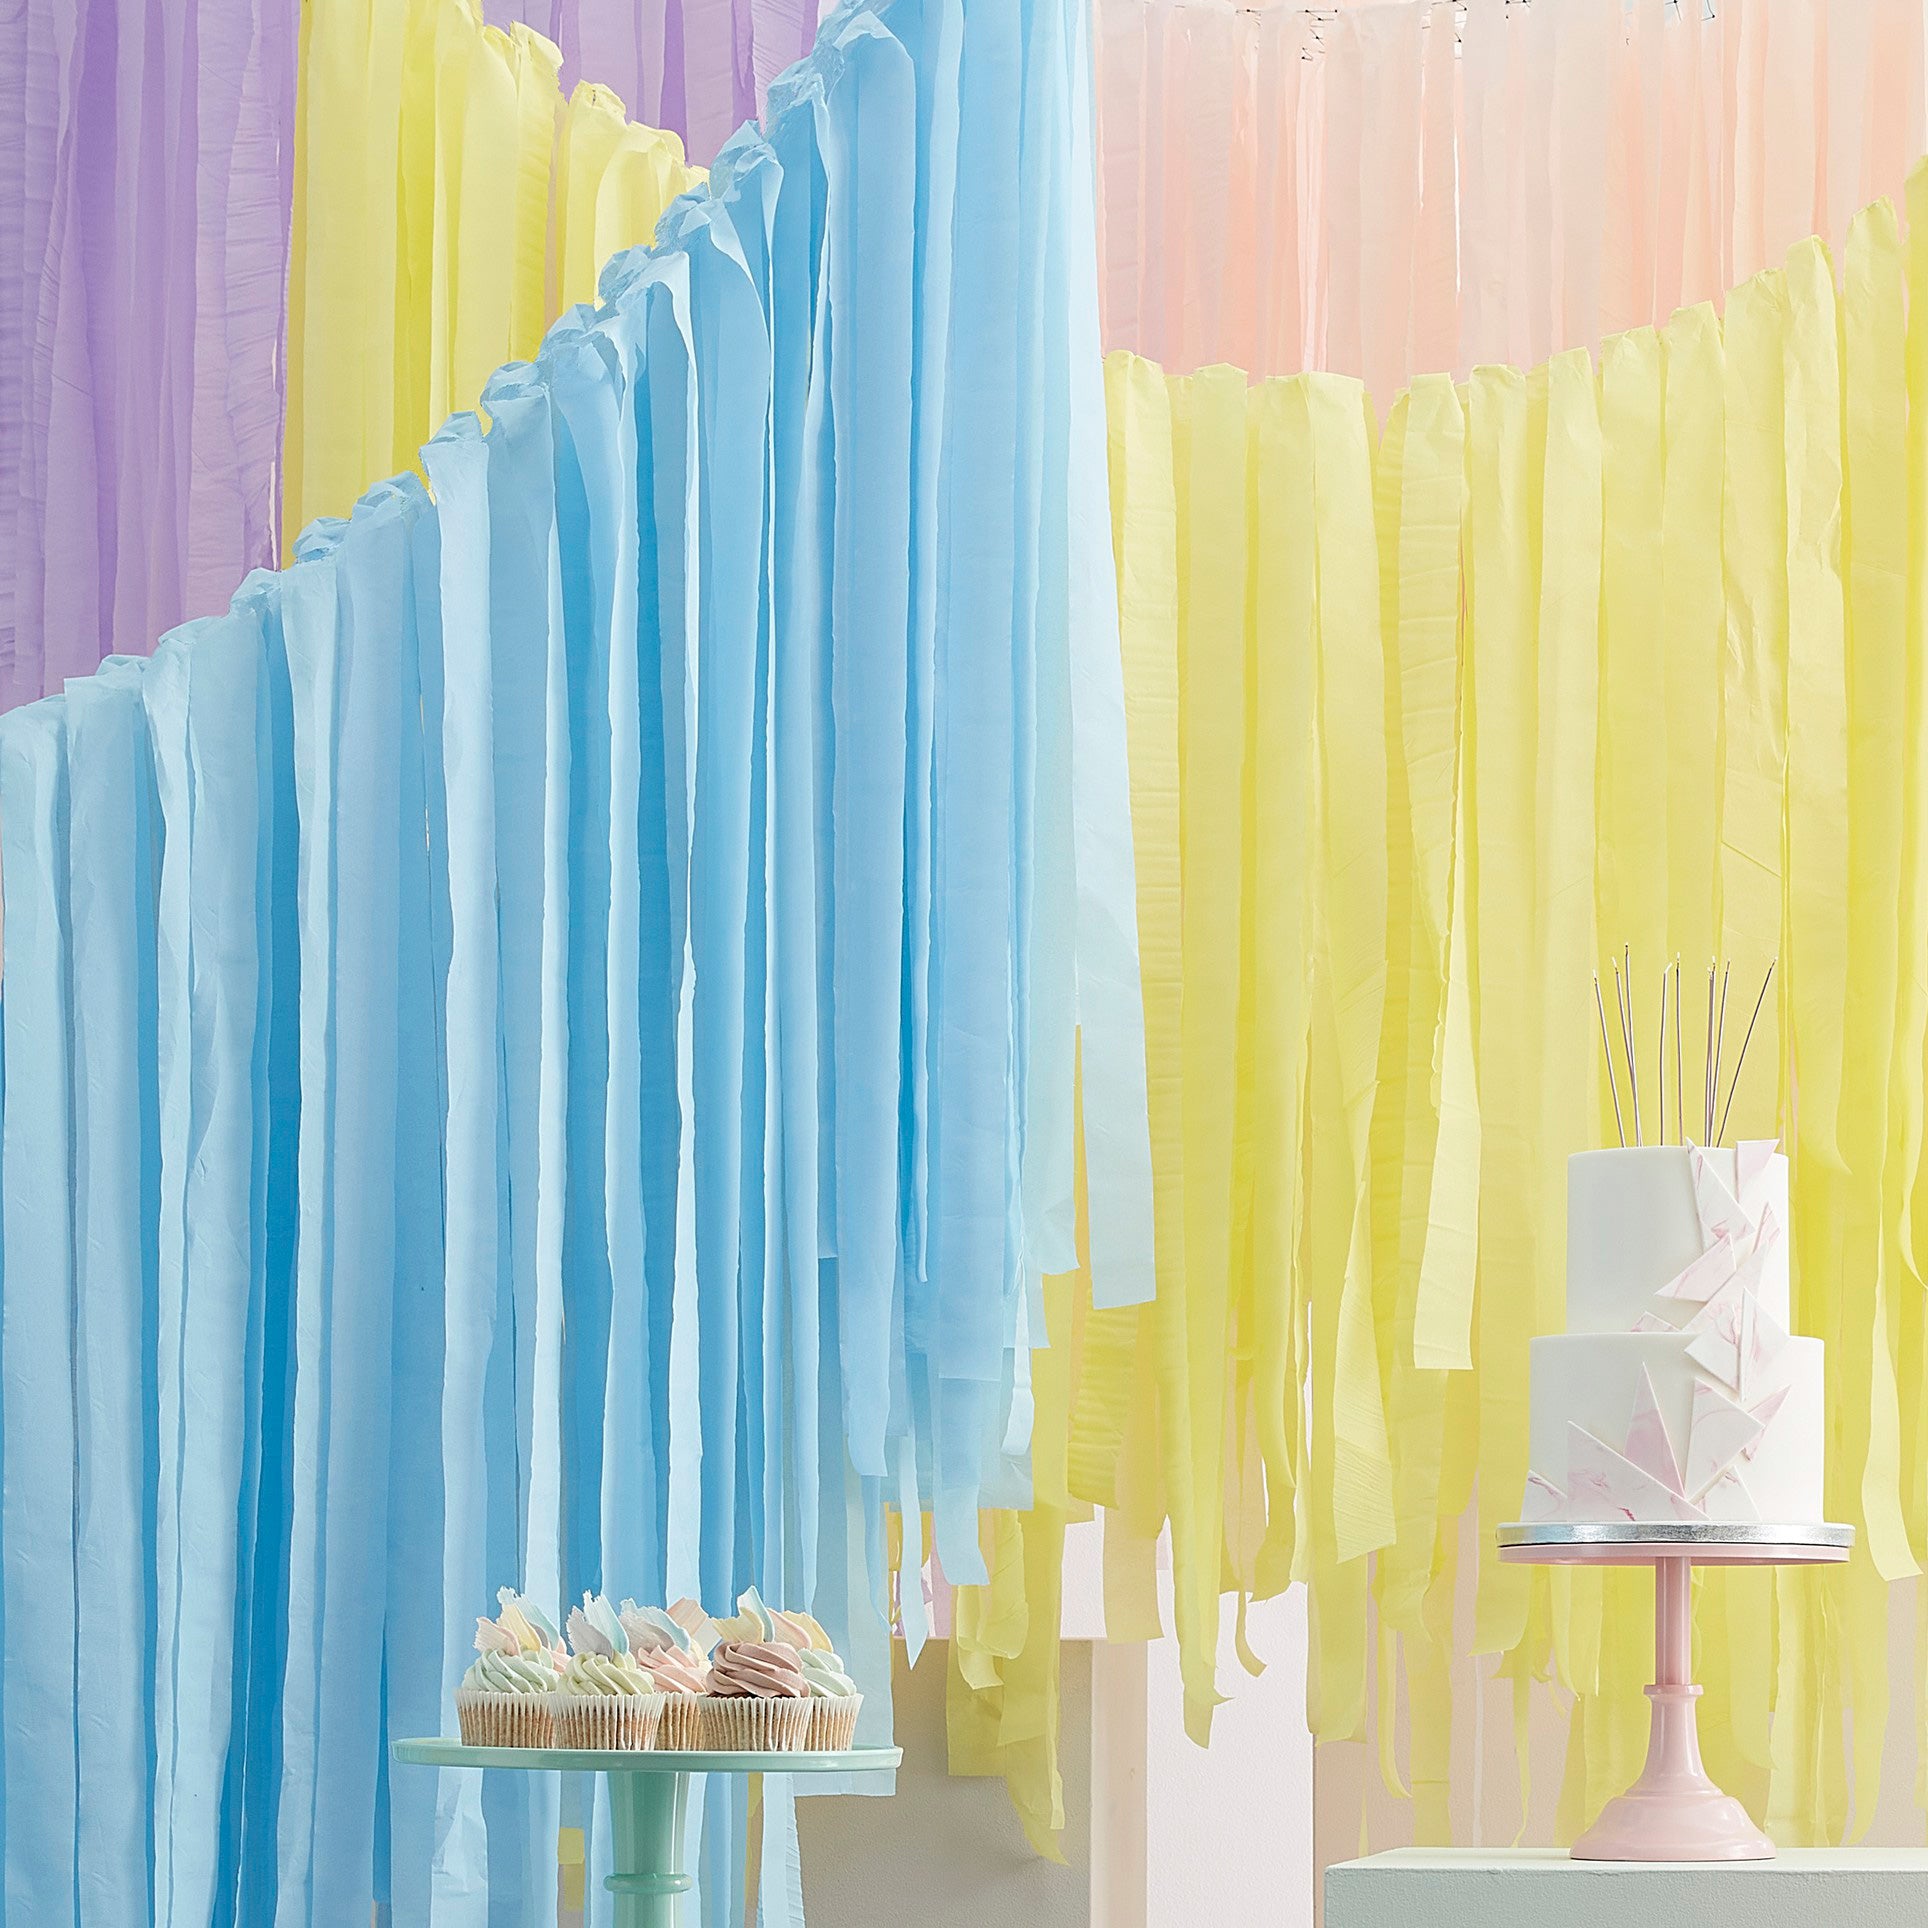 Mix It Up Pastel Streamer Ceiling Decoration